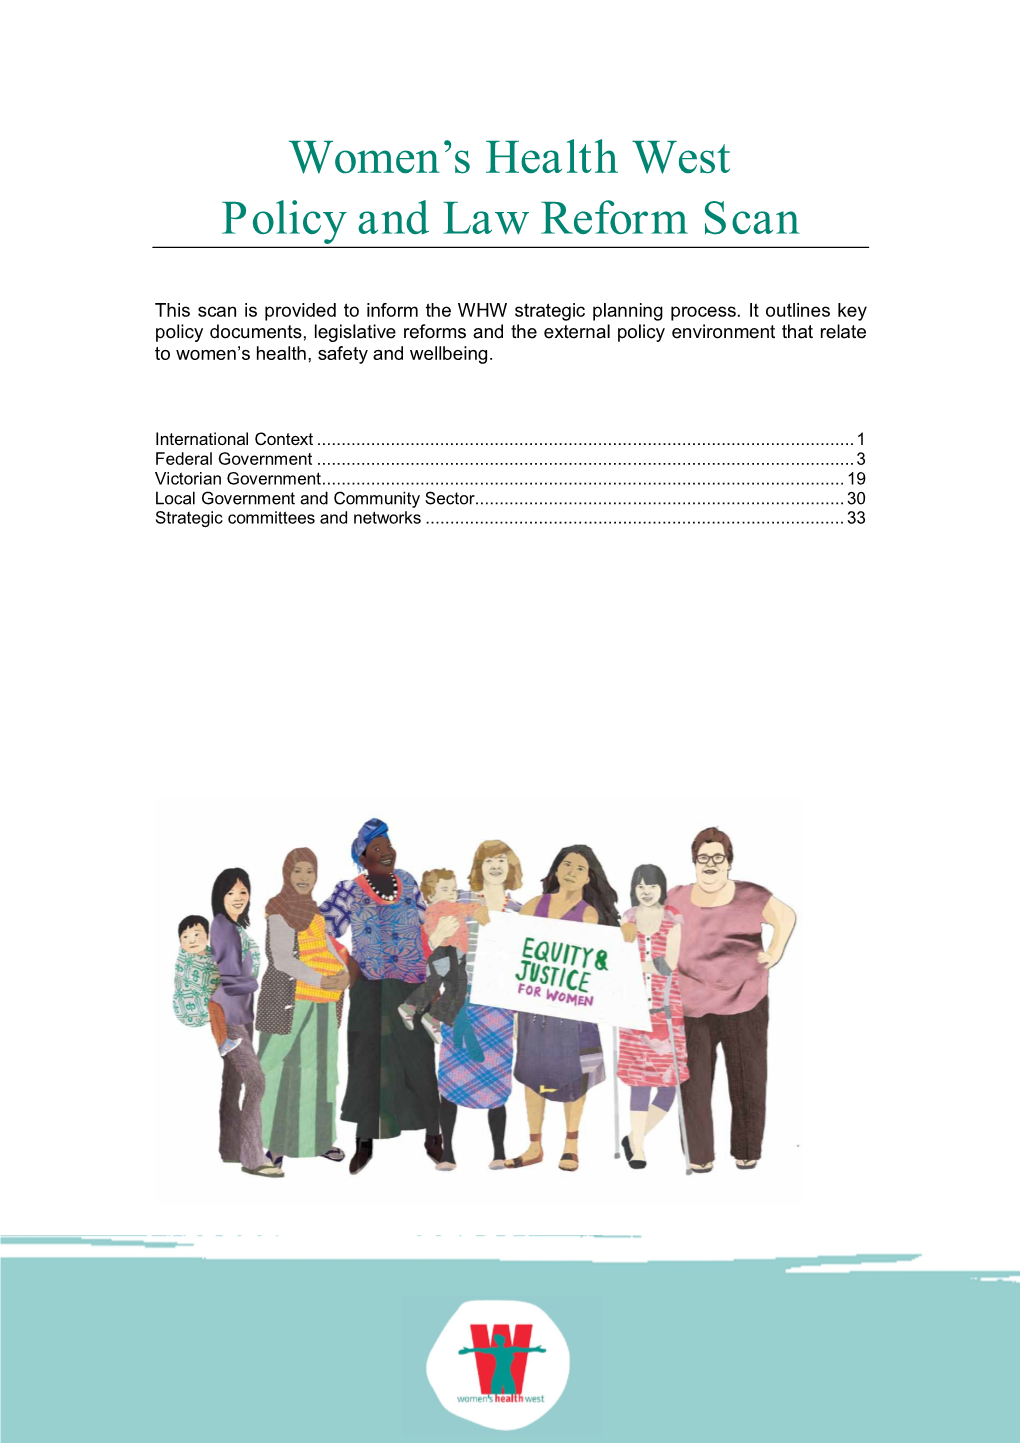 Women's Health West Policy and Law Reform Scan